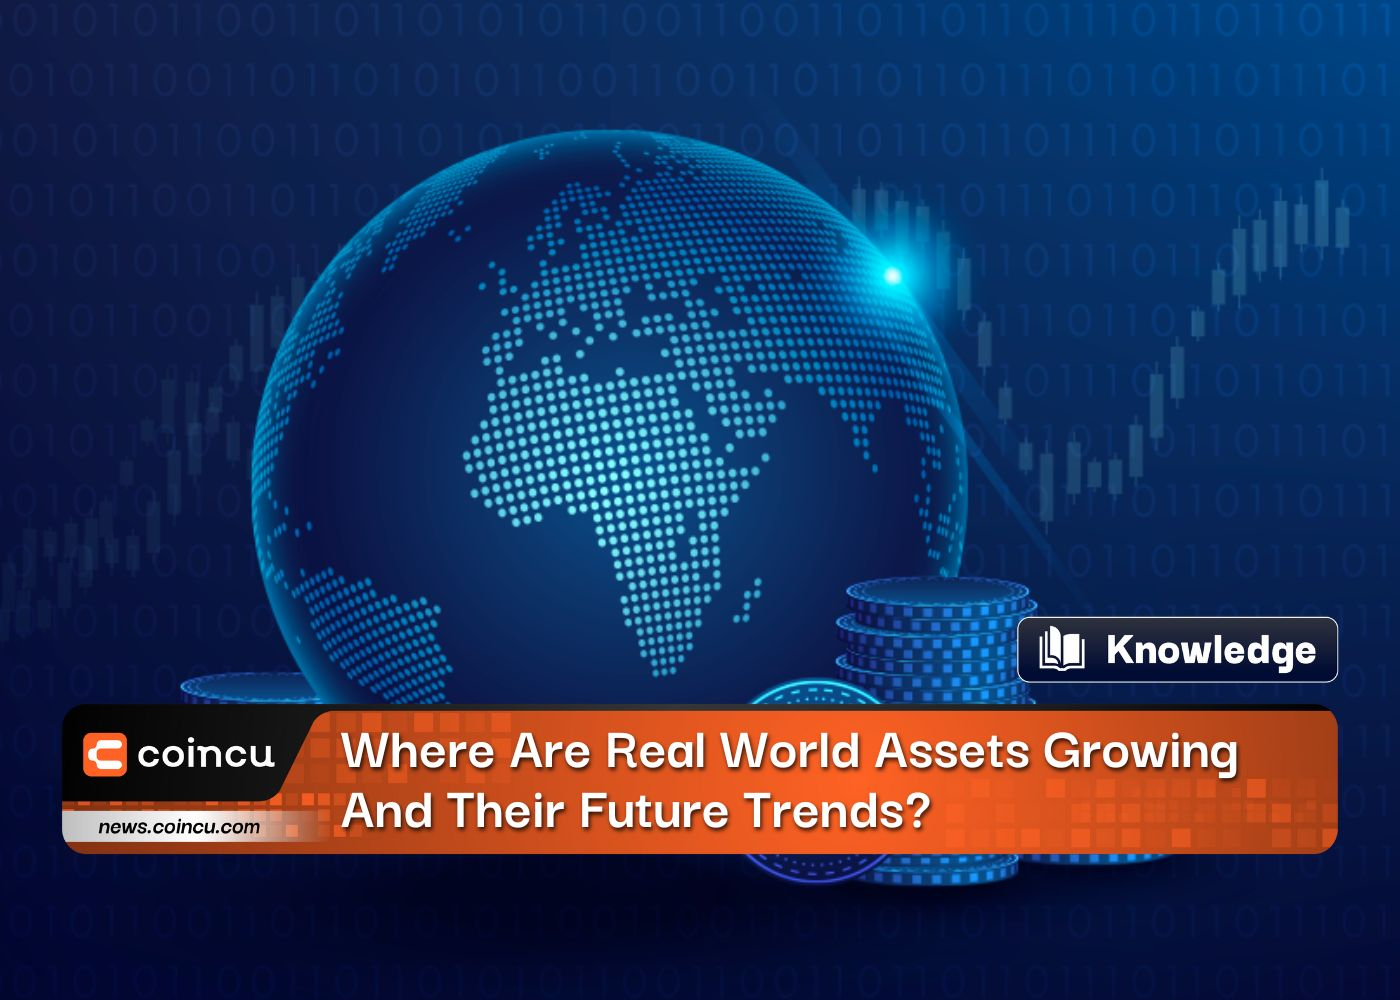 Where Are Real World Assets Growing And Their Future Trends?